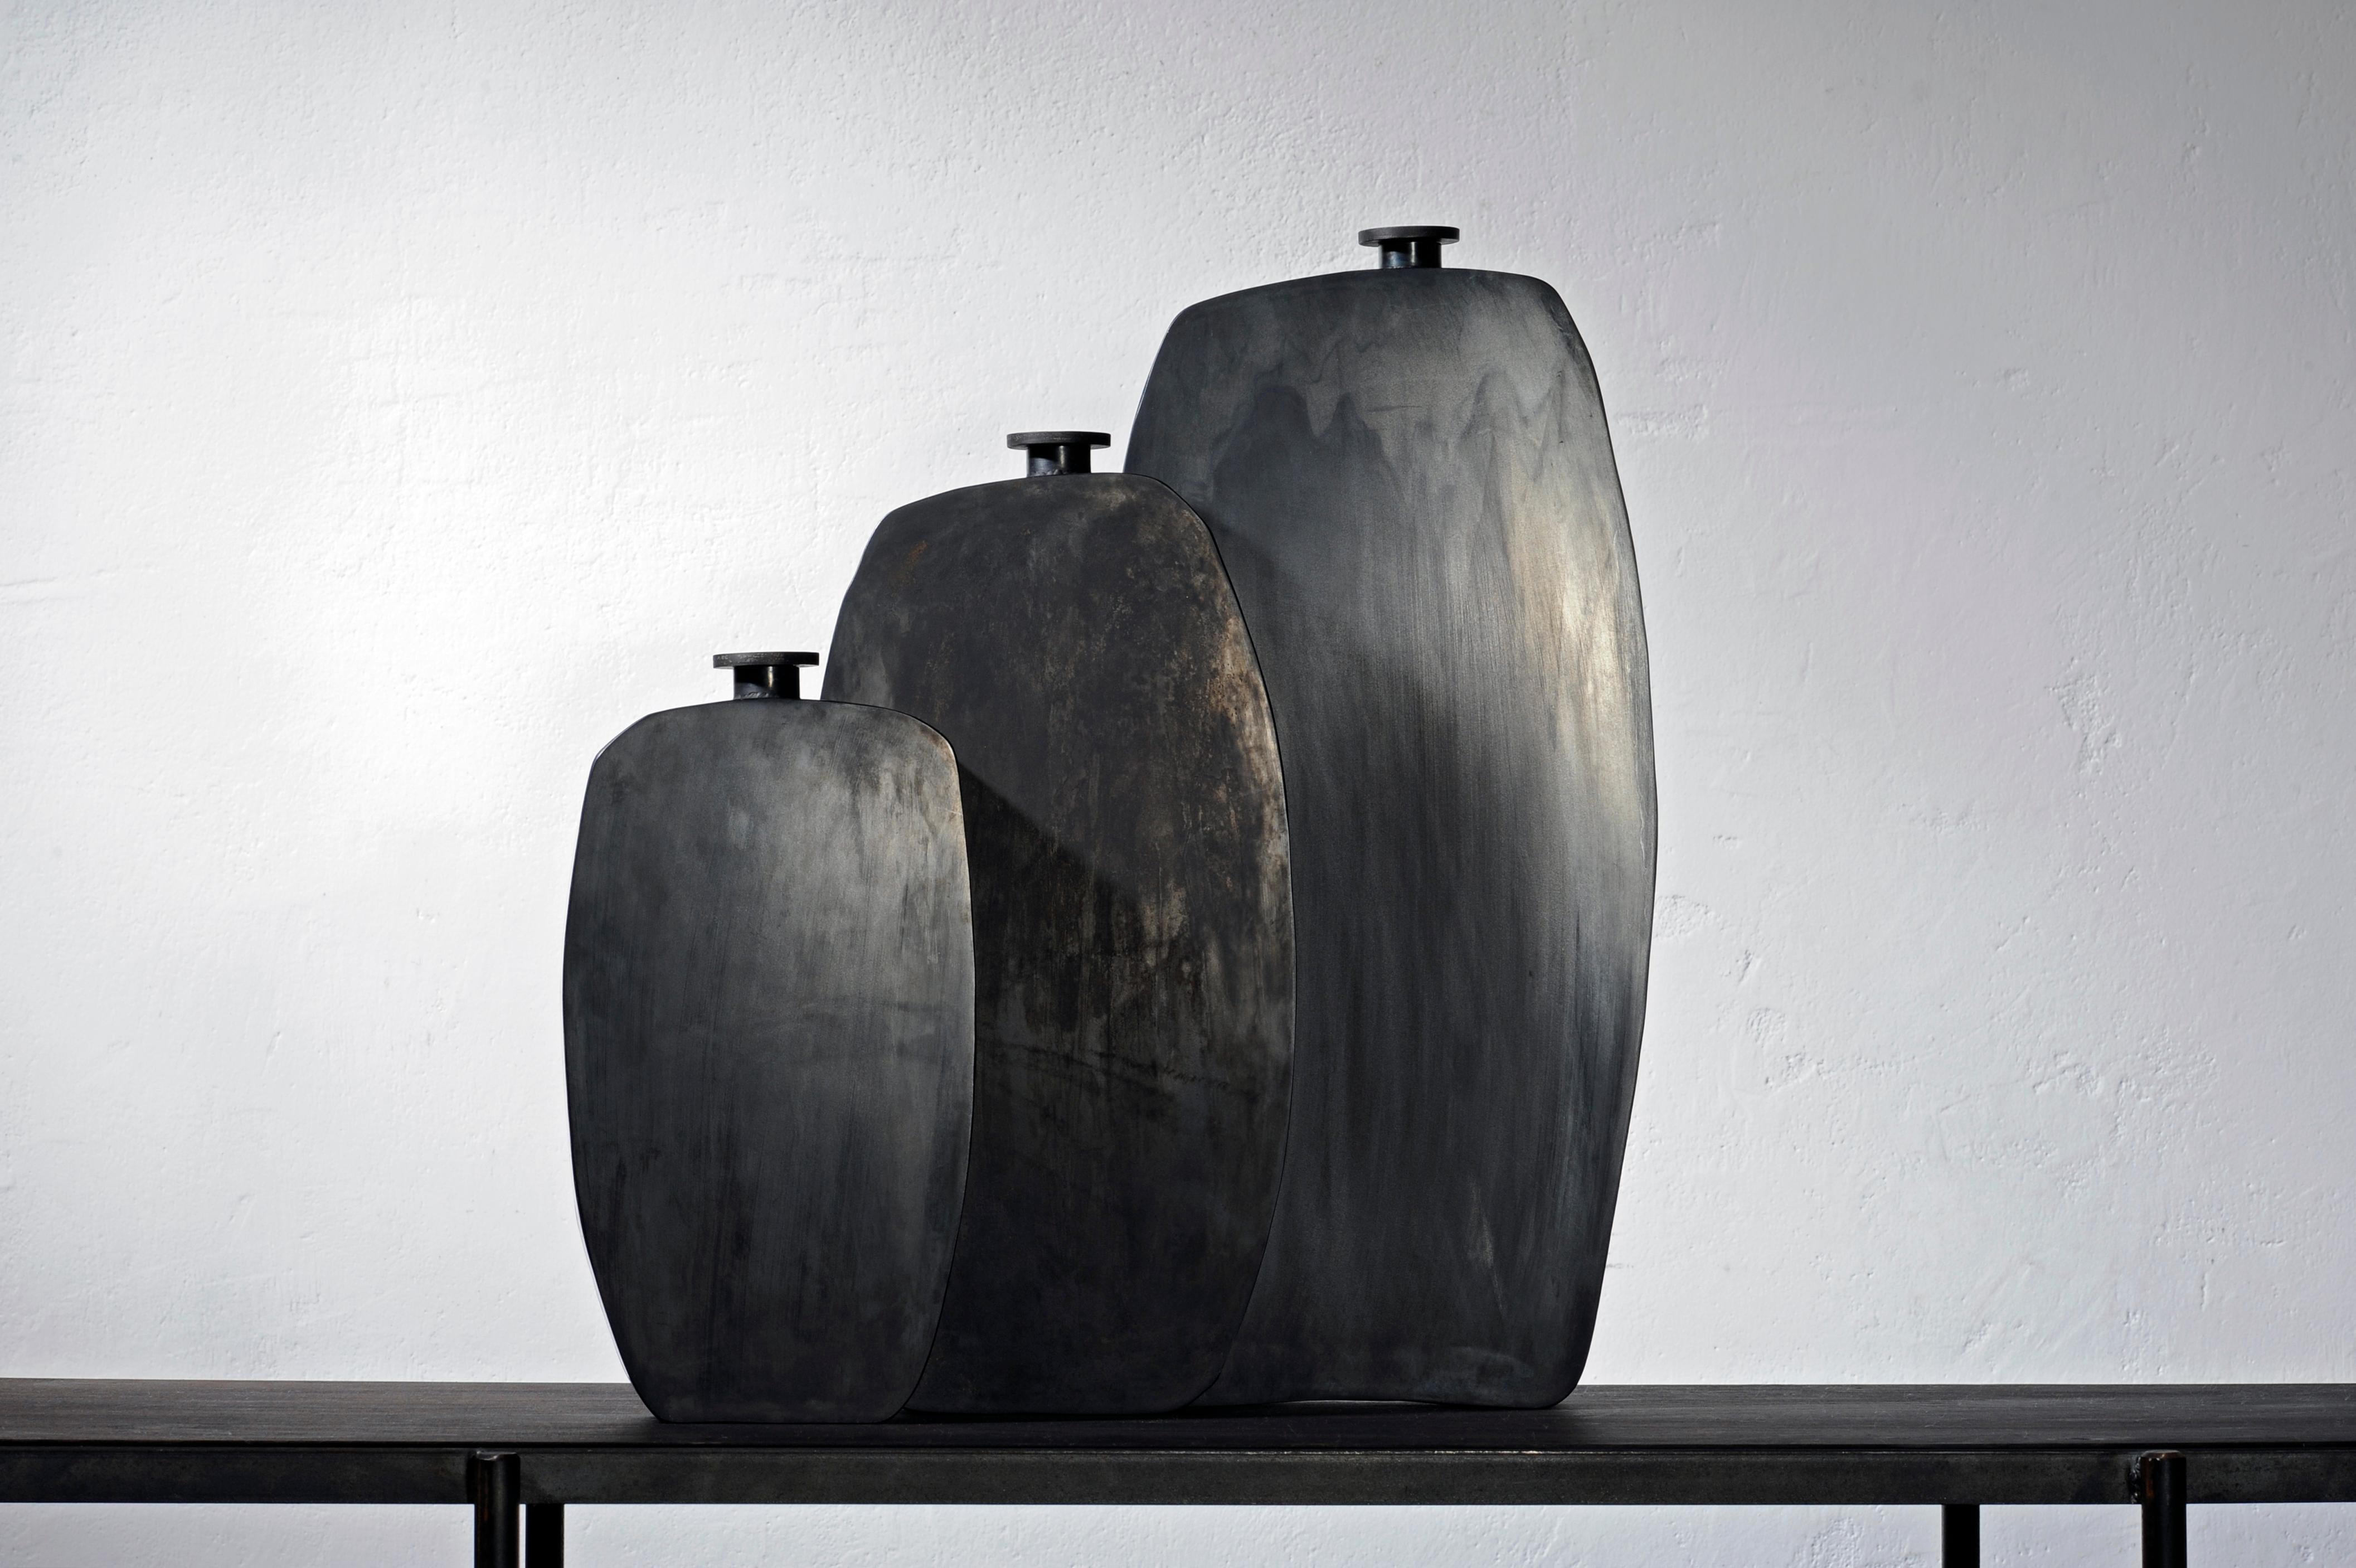 Set of three steel bottles
Signed and numbered vases

Measures: Small steel bottle
15 x 5 x H 28.5 cm
Medium steel bottle
19 x 5 x H 37 cm
Large steel bottle
22 x 5 x H 46 cm
Finish black patina on steel, wax.
  